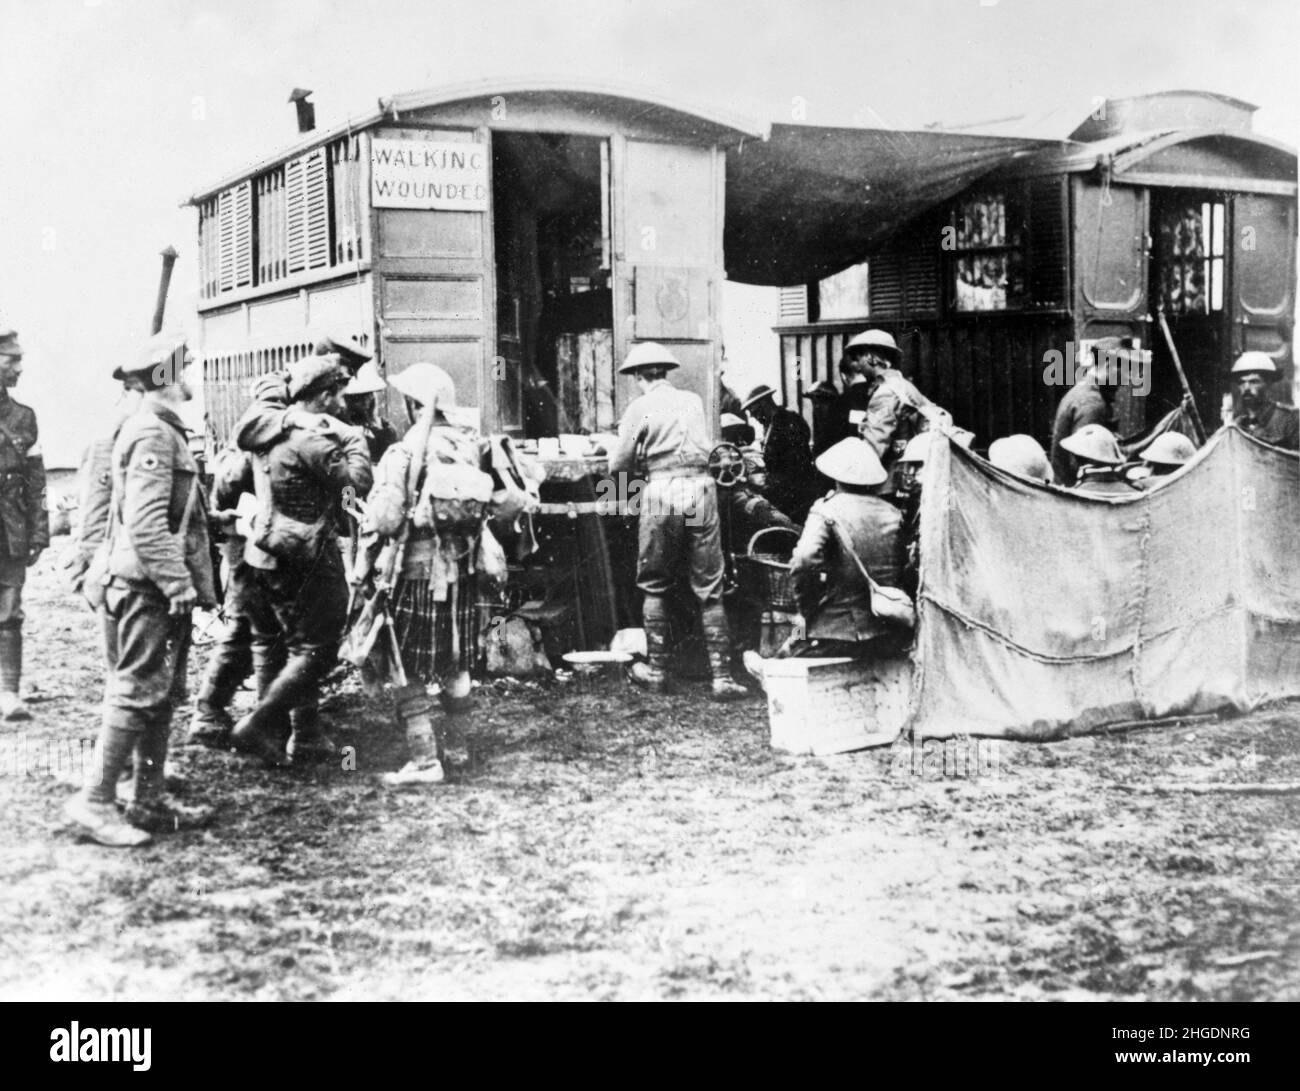 A vintage photo of British soldiers taking wounded men to a field dressing station on the Western front during world war one circa 1918. Stock Photo